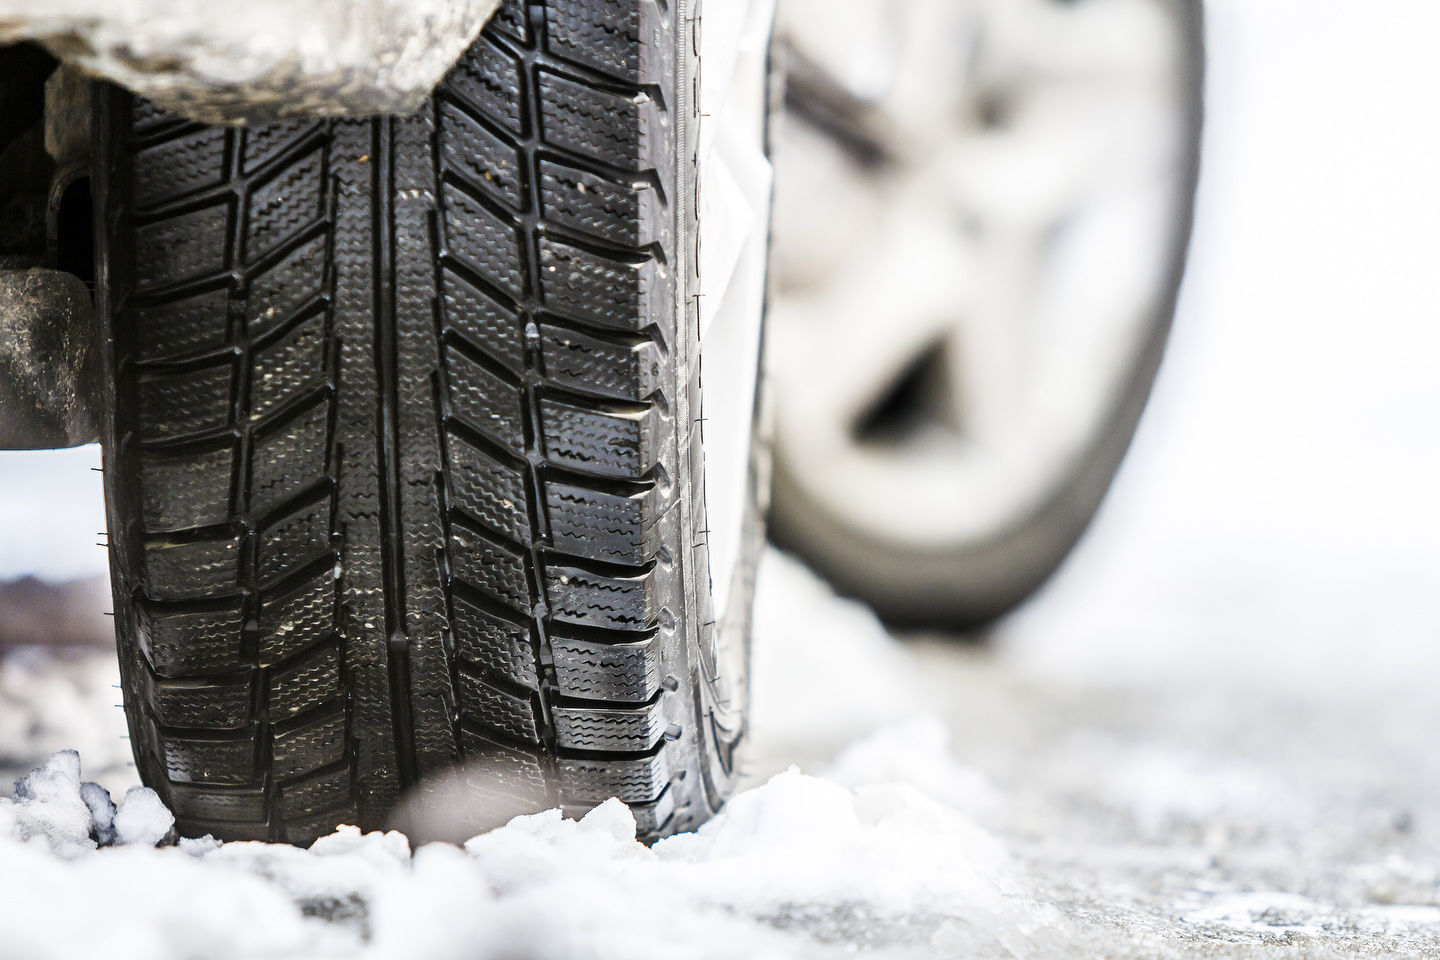 Why now is the right time to start thinking about winter tires